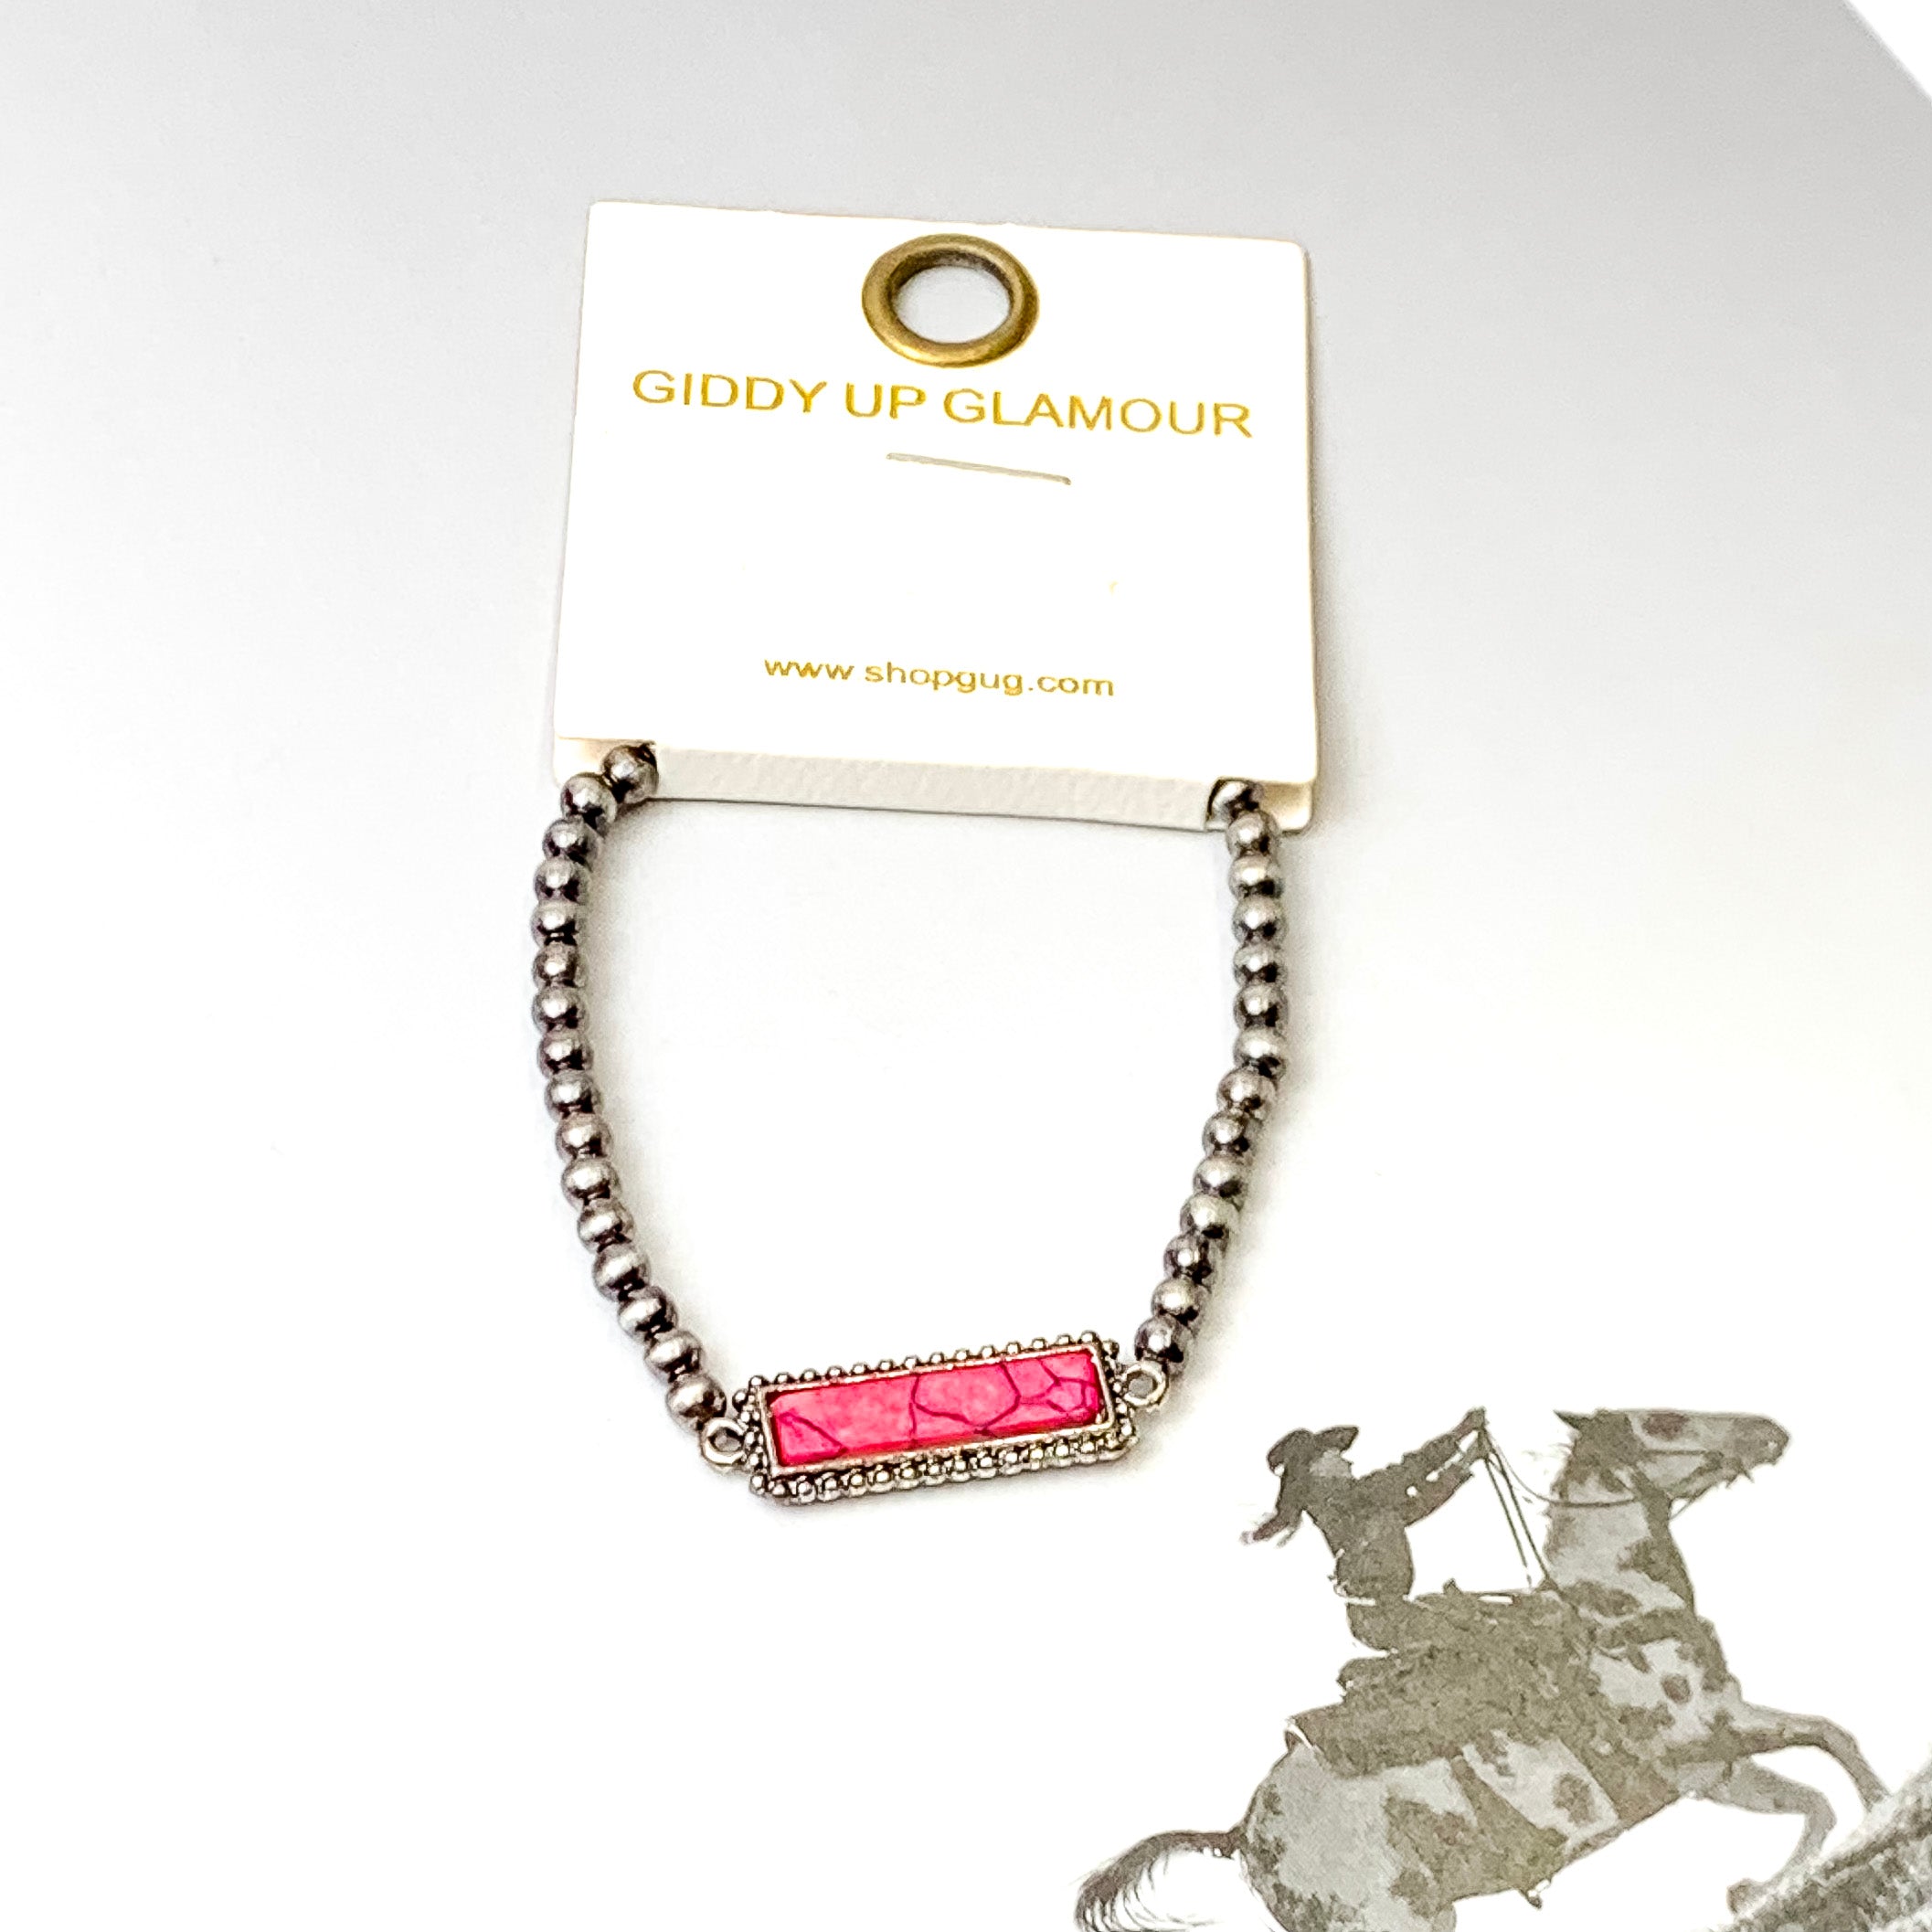 Amarillo By Morning Navajo Pearl Bracelet in Fuchsia Pink - Giddy Up Glamour Boutique